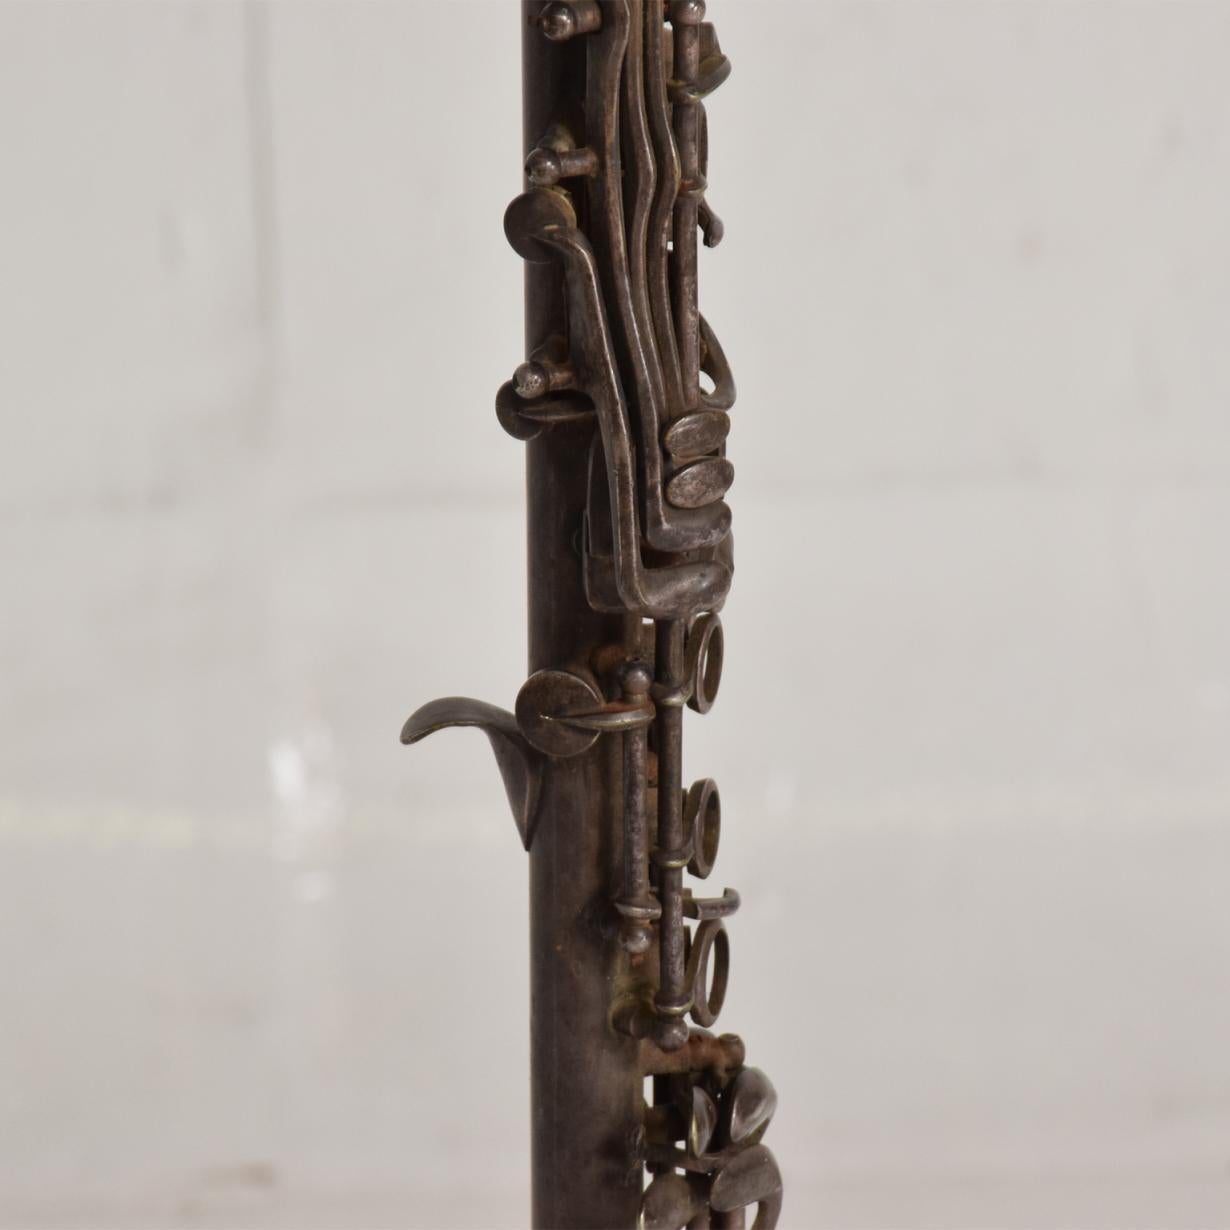 Italian Antique Decorative European Clarinet Oboe Sterling Silver Plated 38526